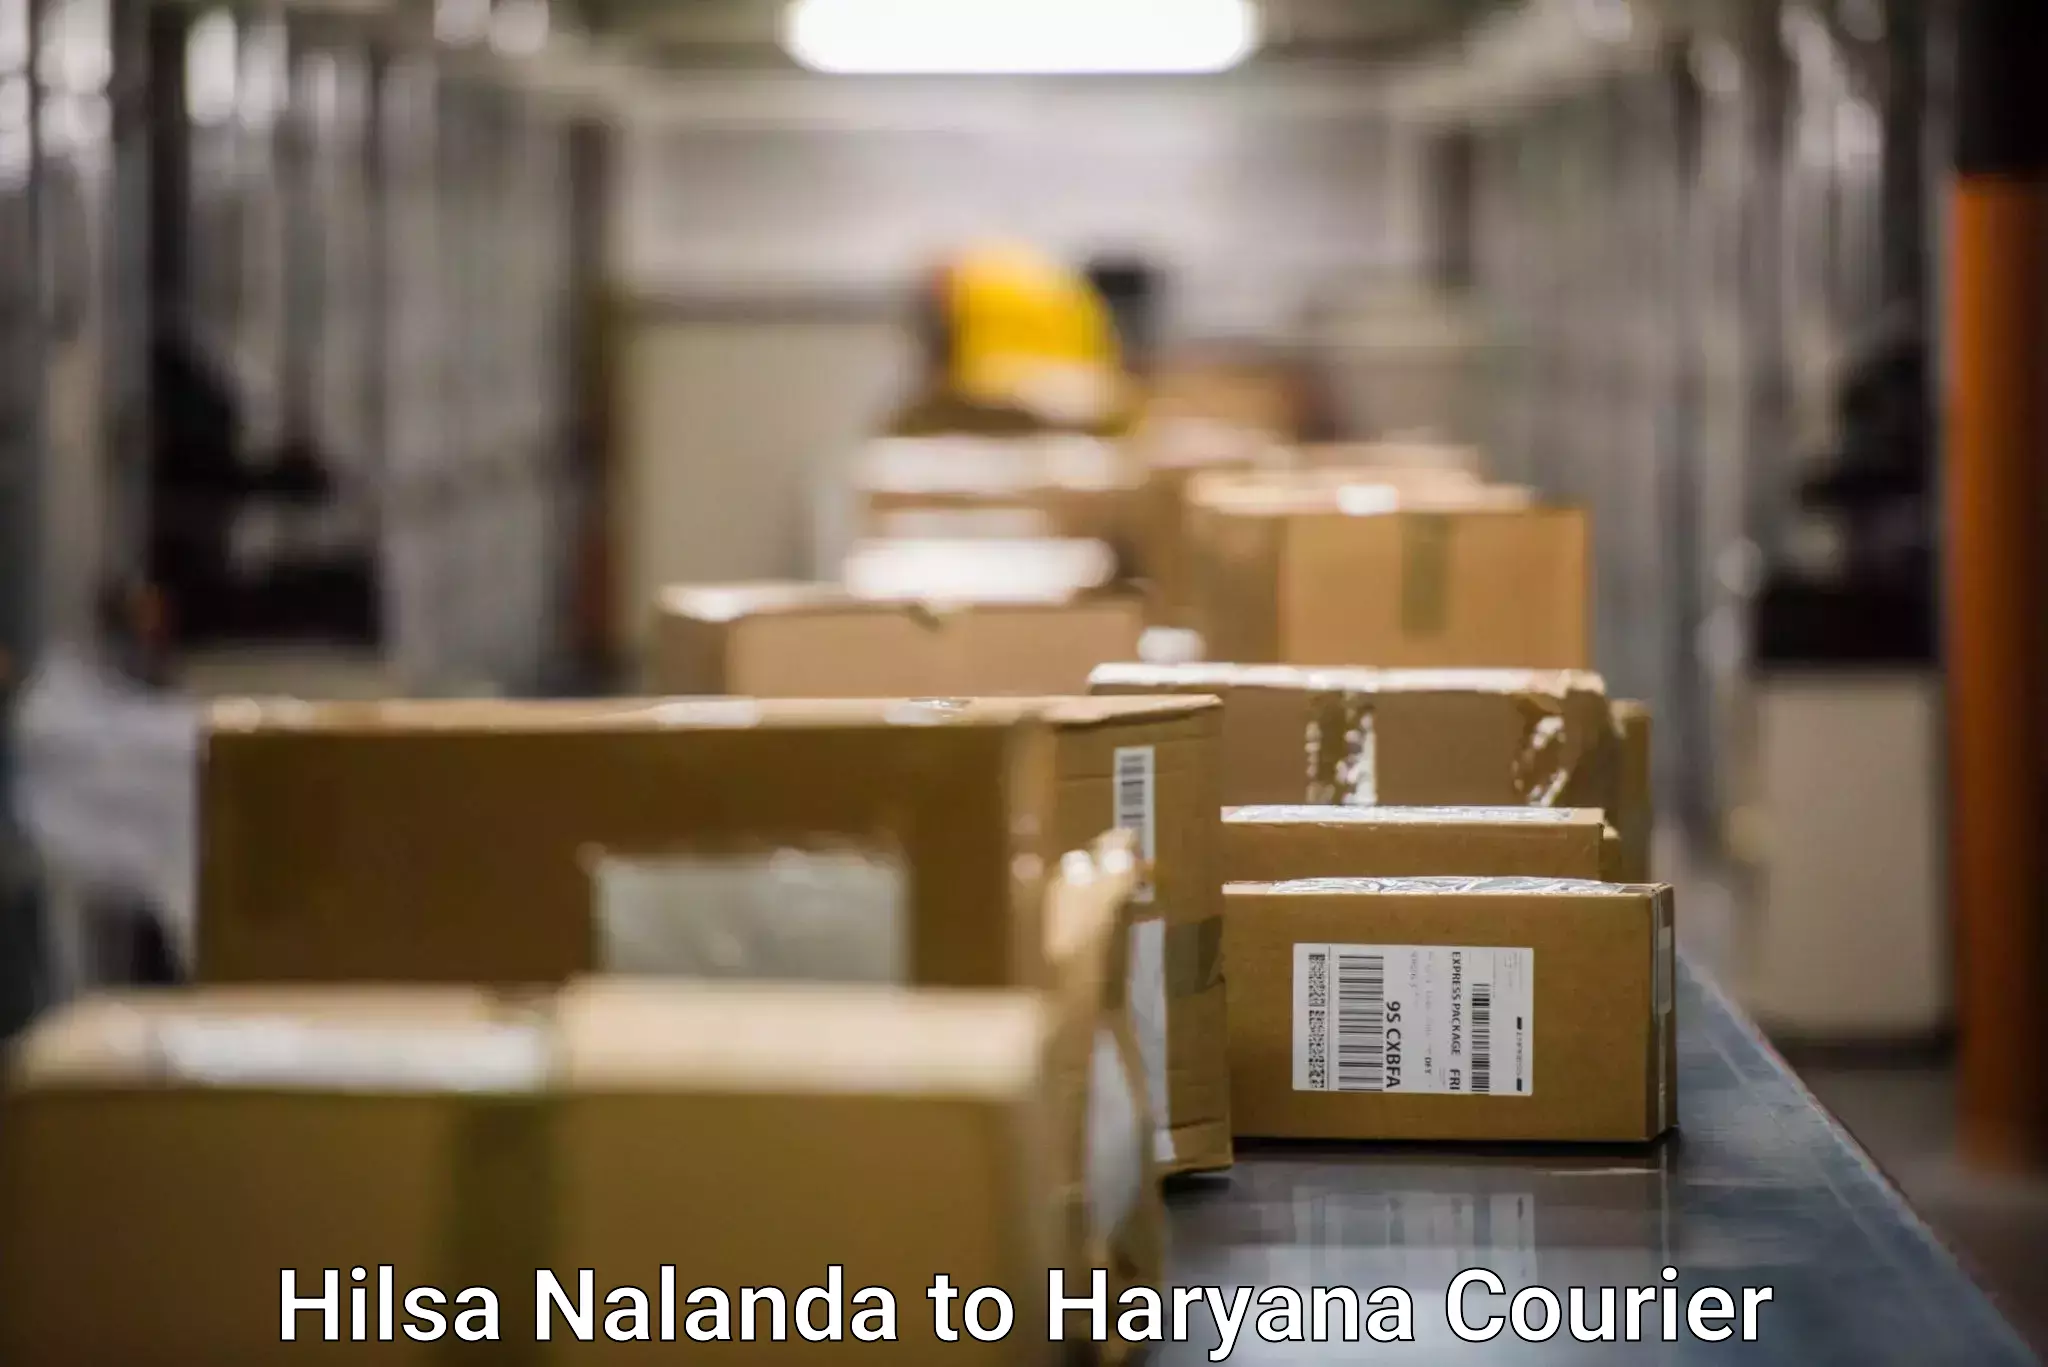 Residential courier service Hilsa Nalanda to Sonipat